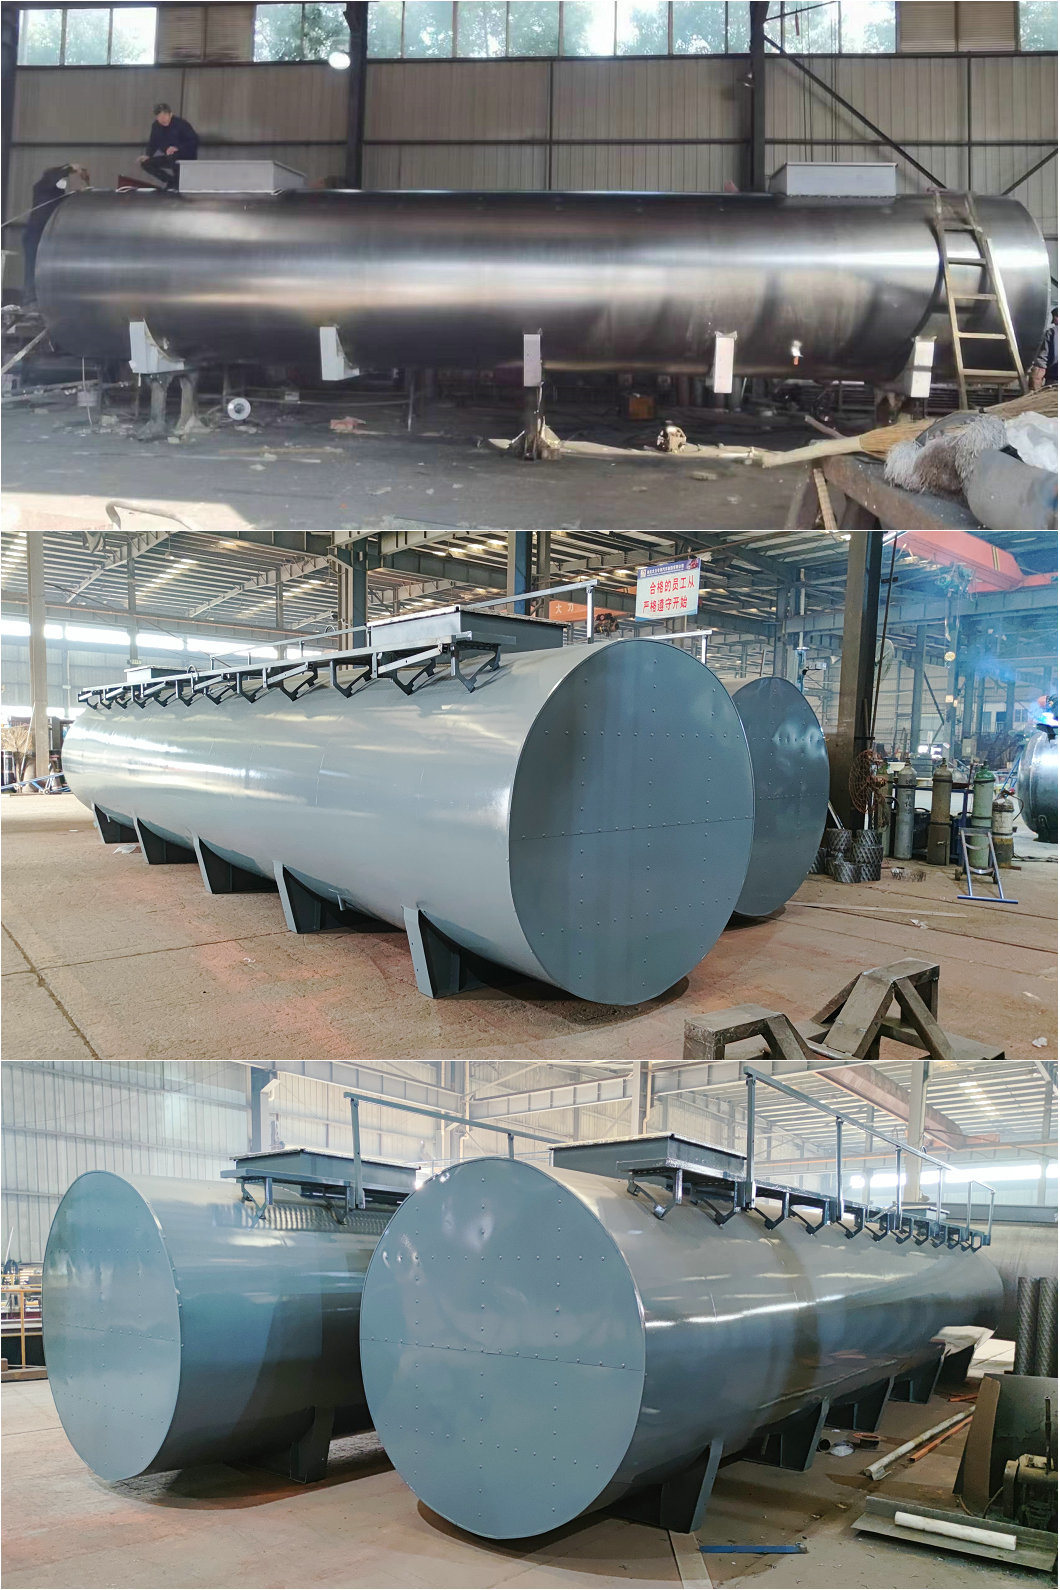 Sodium Hypochlorite (Bleach NaOCL) Storage Transportation Tanks for Truck Trailer Mounted with Insulation Layer 6604 Gallon 25kl